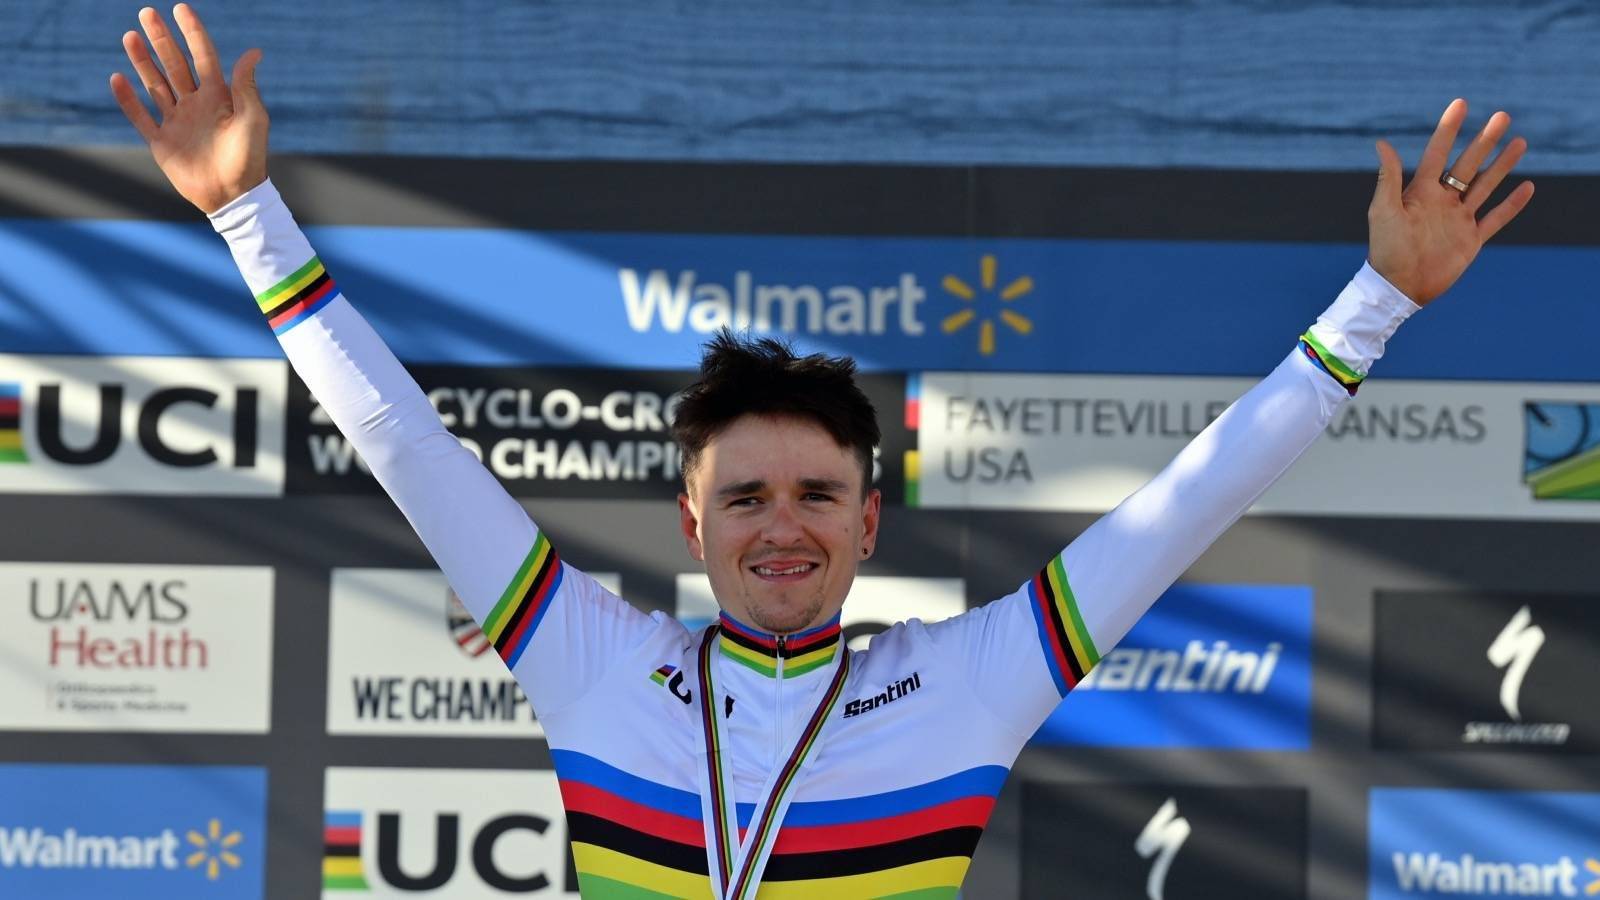 British Thomas Pidcock celebrates on the podium after winning the men's elite race at the World Championship cyclocross cycling in Fayetteville, Arkansas, United States, Sunday 30 January 2022. The world championships are taking place from 28 until 30 January. BELGA PHOTO DAVID STOCKMAN